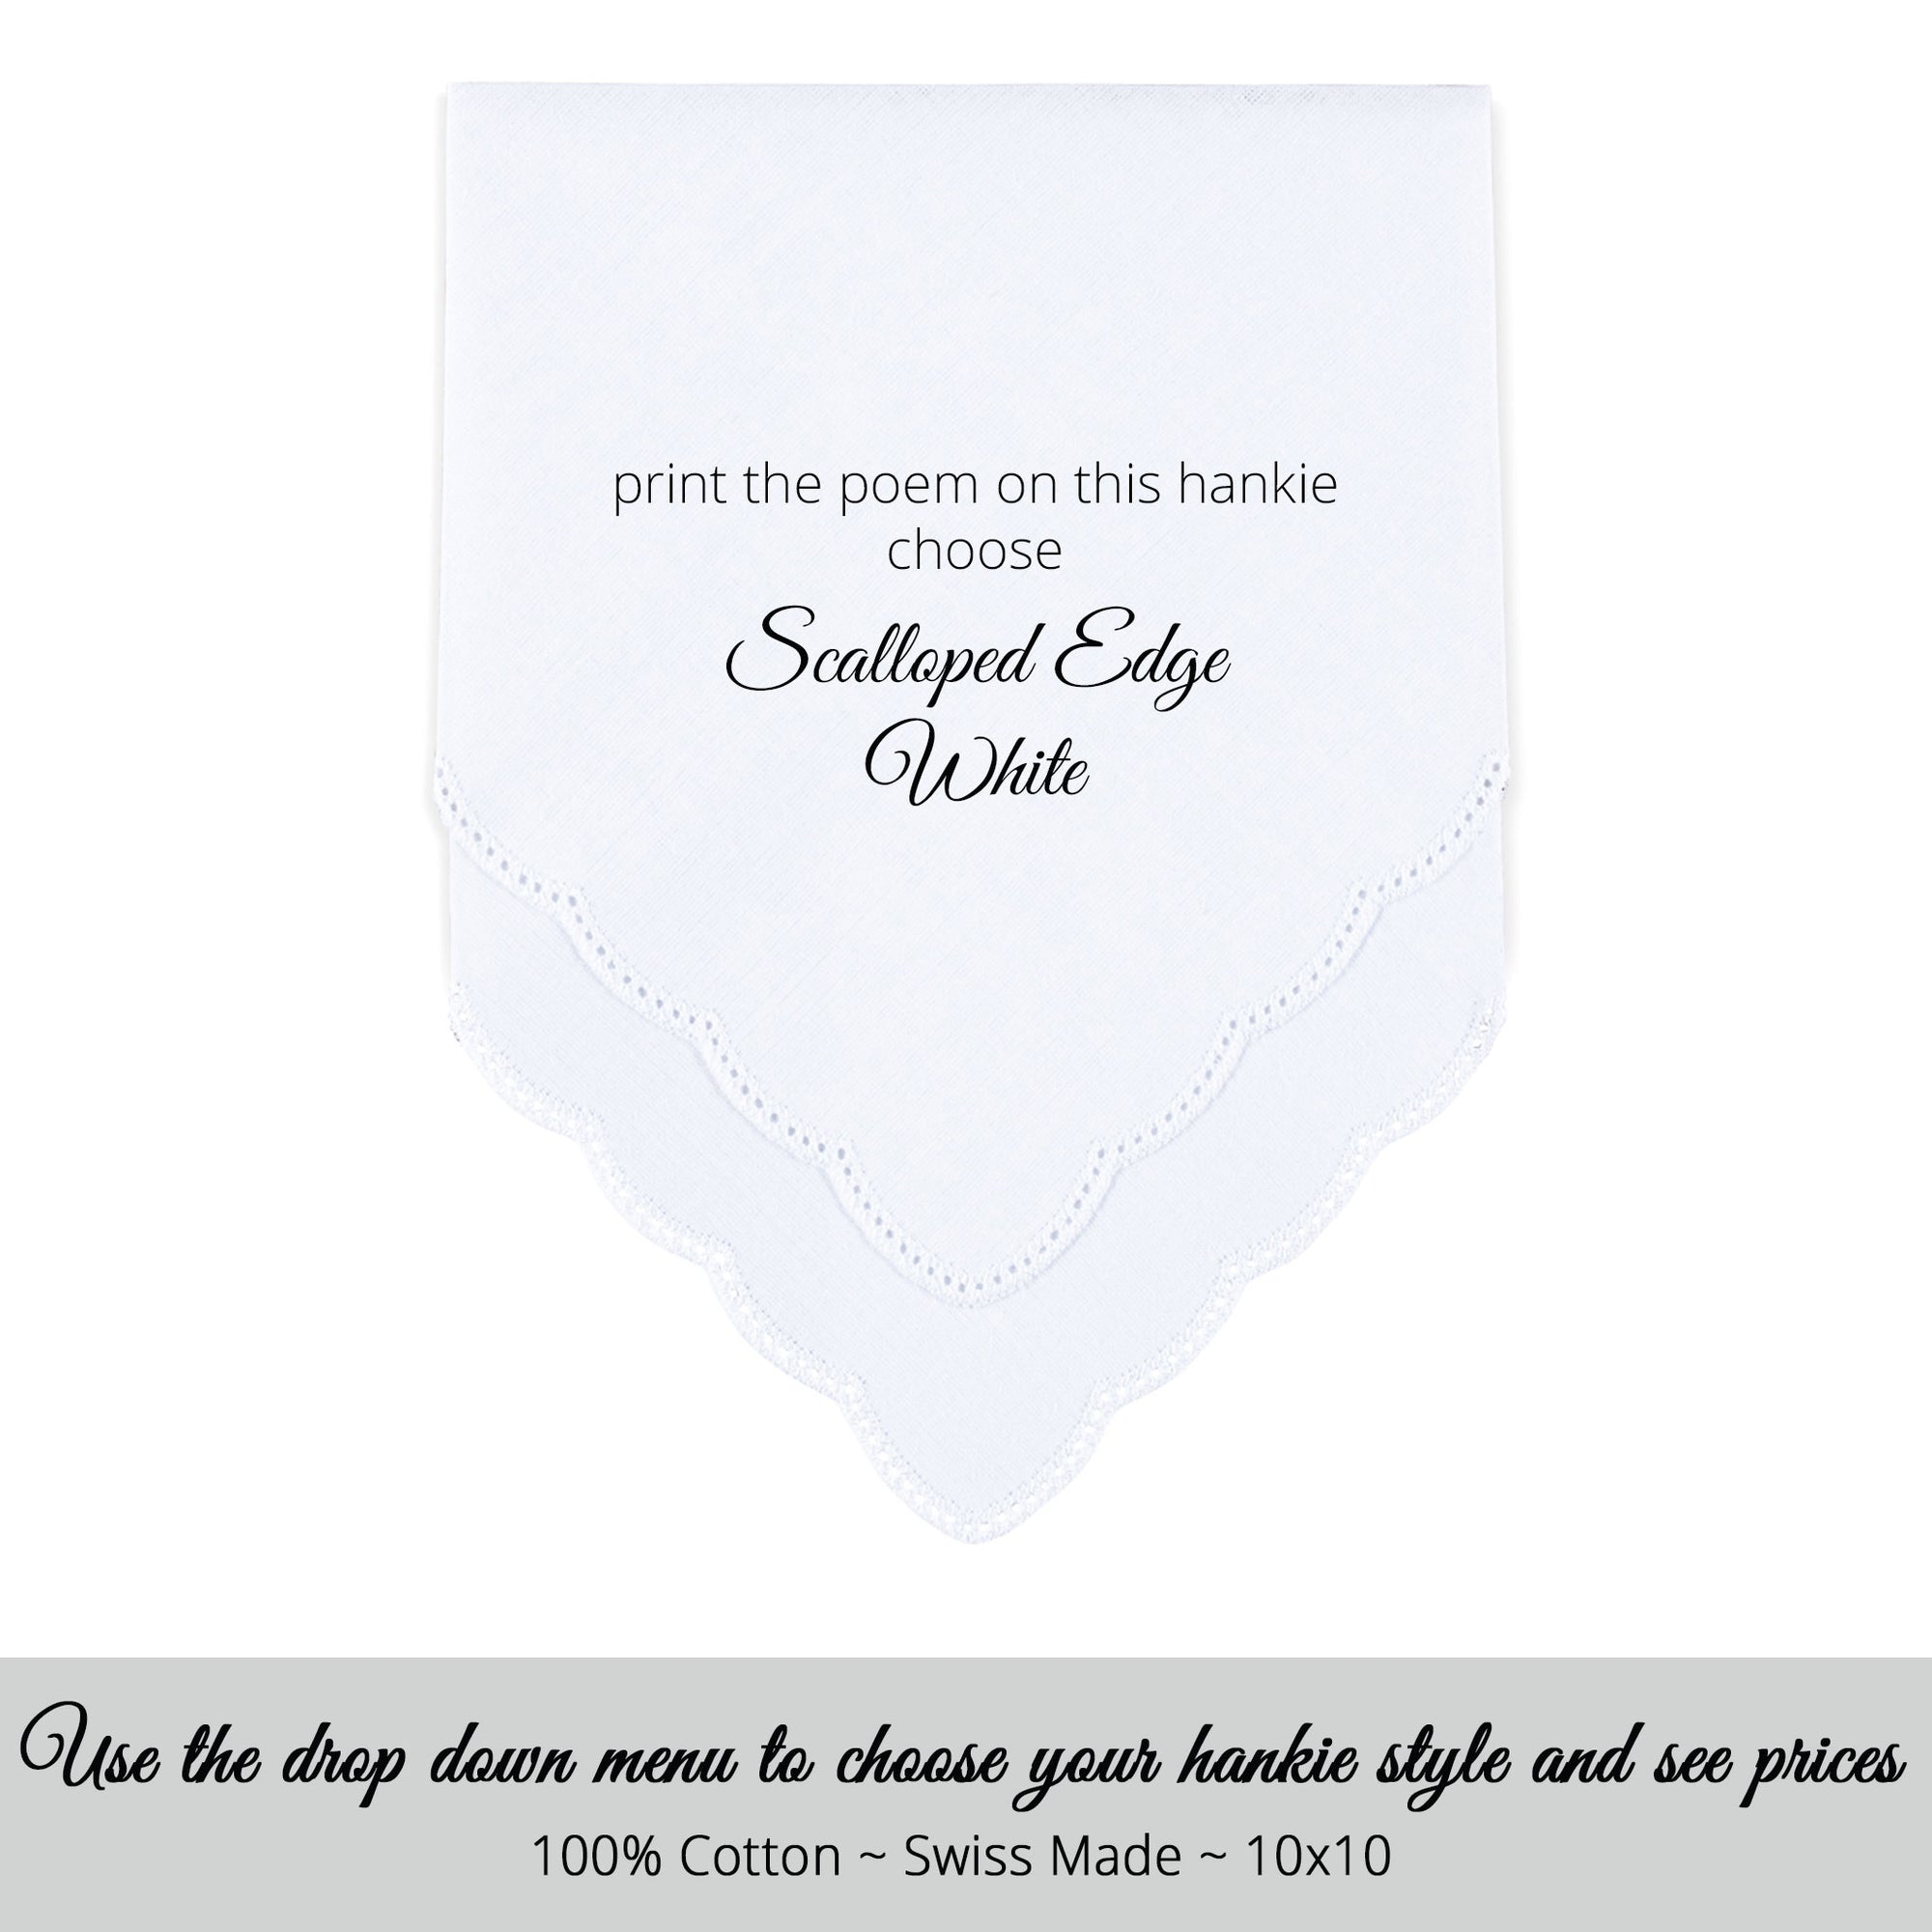 Wedding Handkerchief Scalloped edge white personalized poem for the stepdaughter of the bride